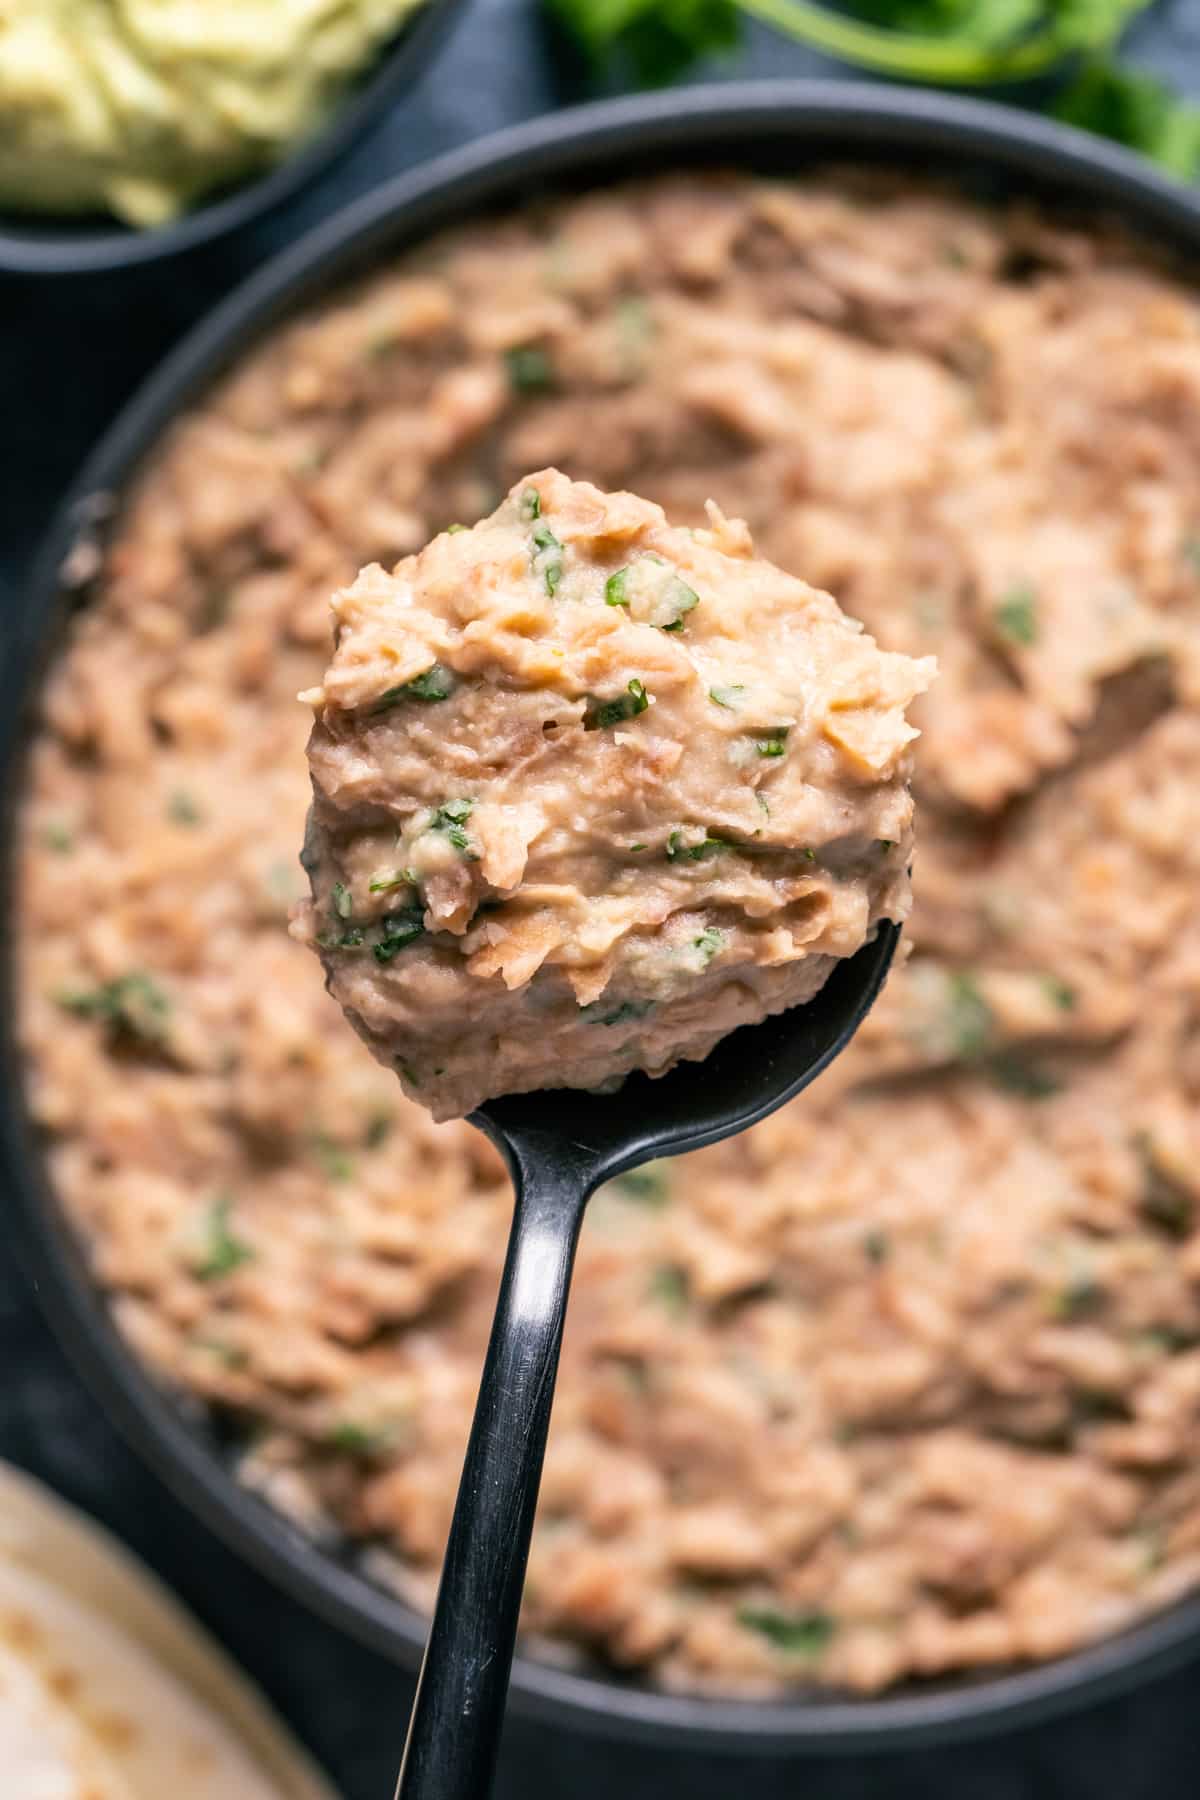 Vegan refried beans in a black bowl with a spoon.